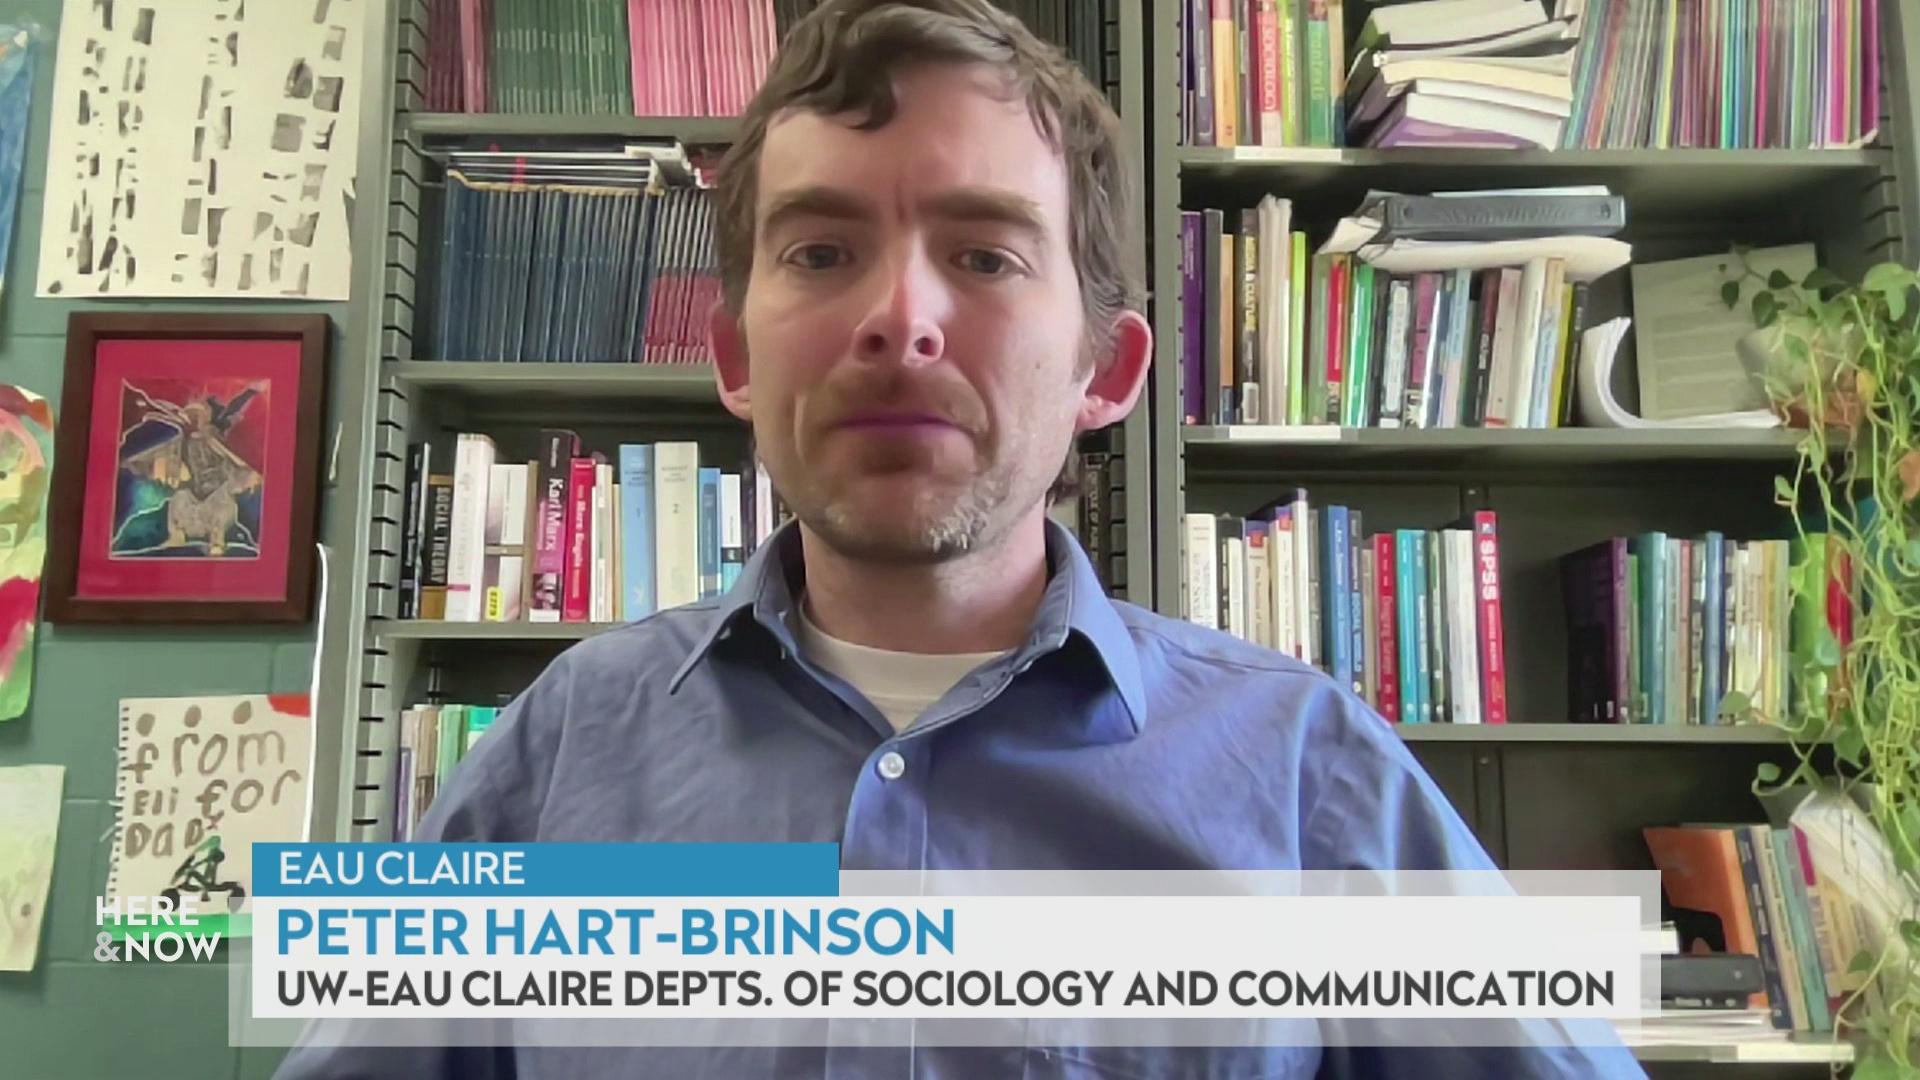 A still image from a video shows Peter Hart-Brinson seated in front of a shelves lined with books with a graphic at bottom reading 'Eau Claire,' 'Peter Hart-Brinson' and 'Eau Claire Dept. of Sociology and Communication.'